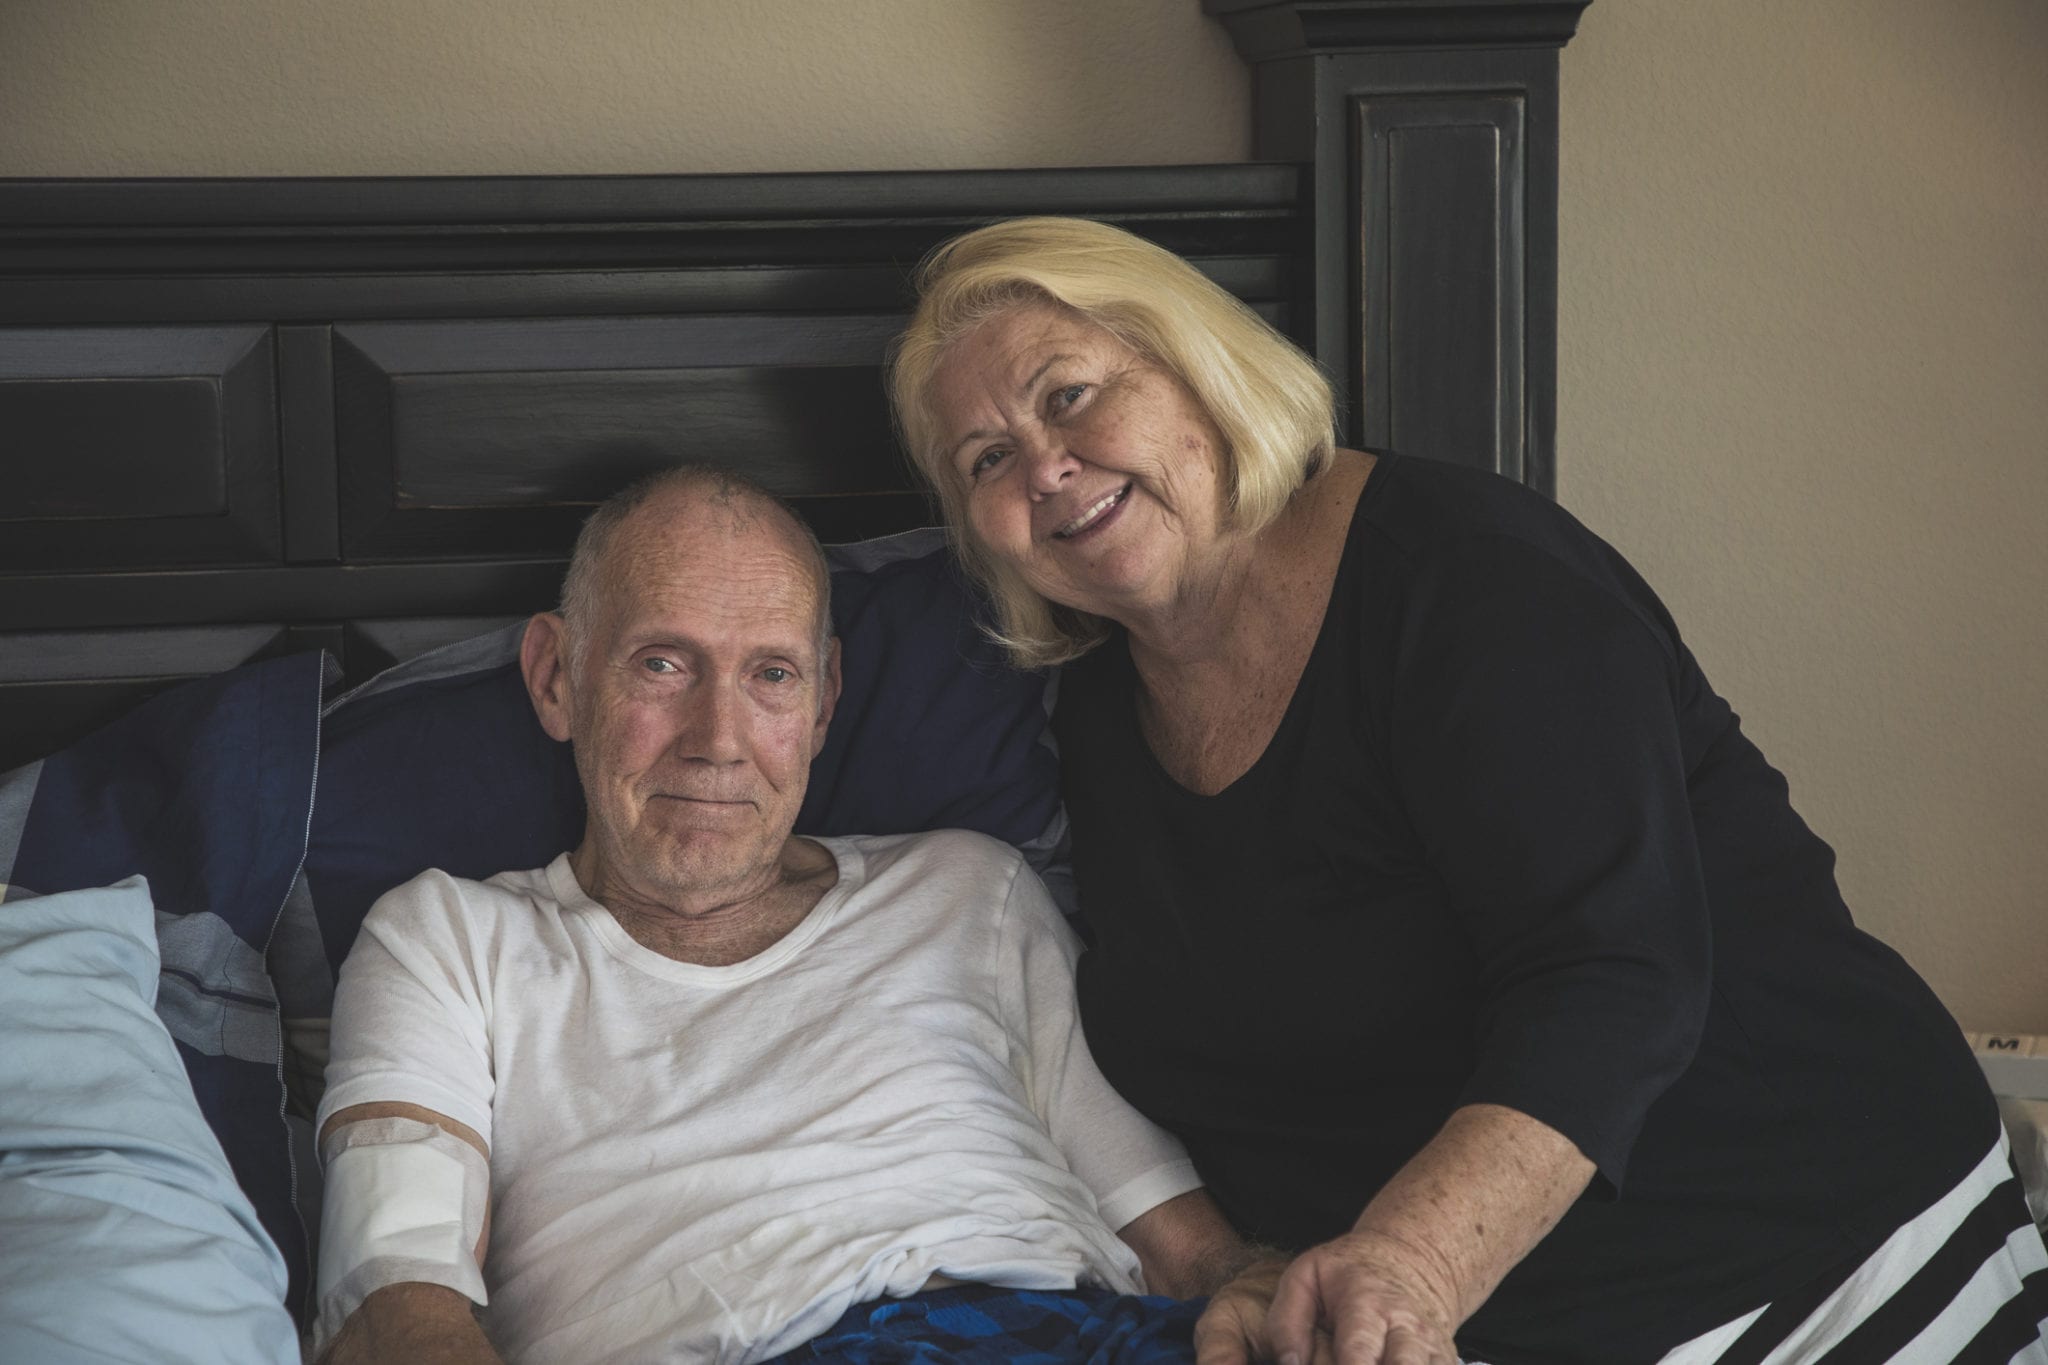 Husband in hospice care for Parkinson's disease and cancer.